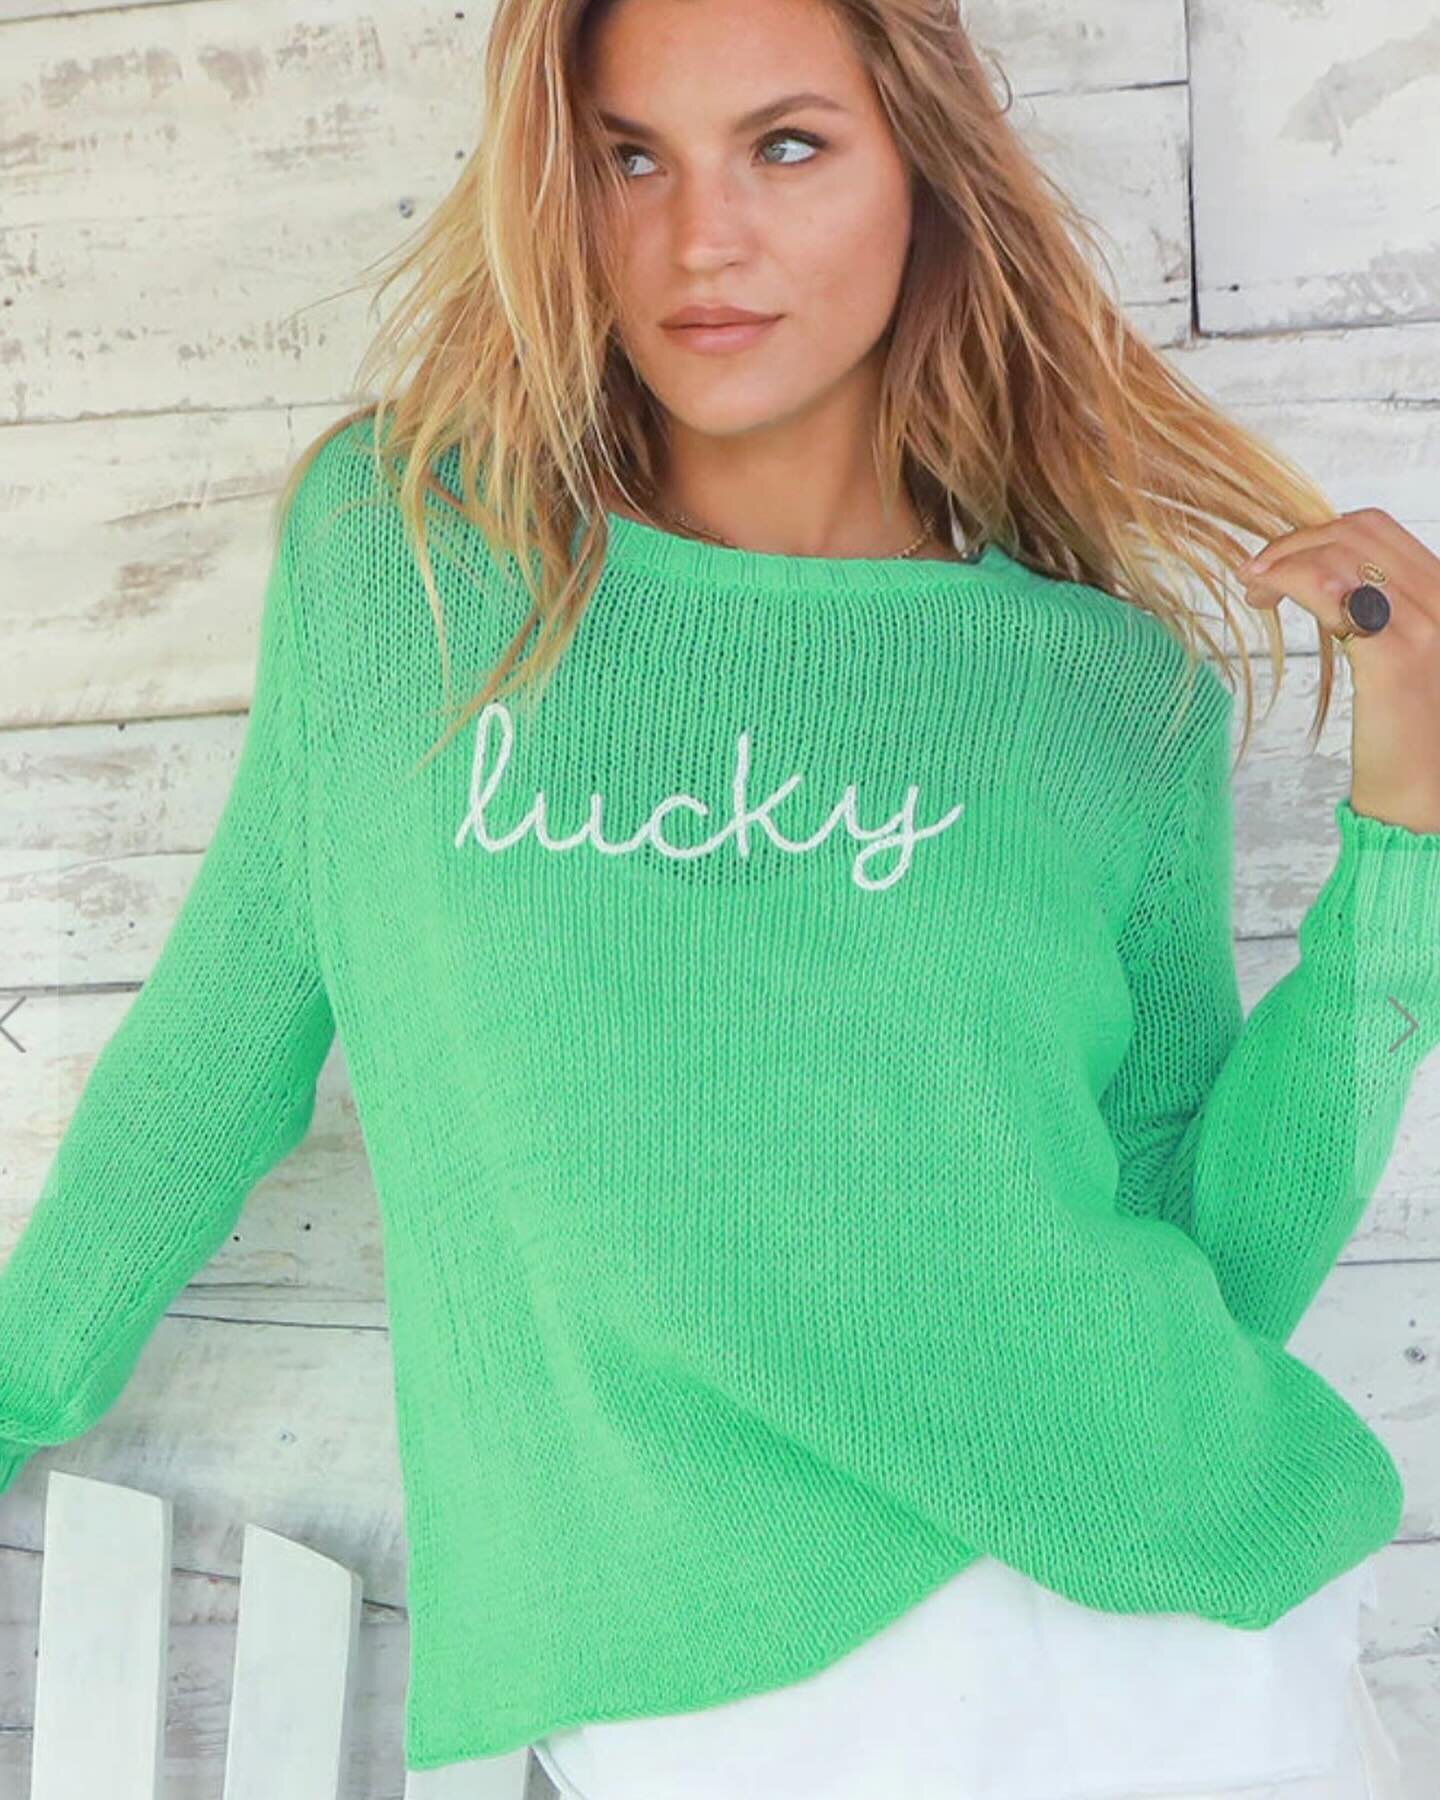 Need a little something green for this weekend?! We&rsquo;ve got it💚🍀 Shop Friday 12-5 and Saturday 12-4 #stpatricksday #weargreen #lucky #weekendoutfit #shopsmall #shoplocal #original #unique #fun #poppystylenj